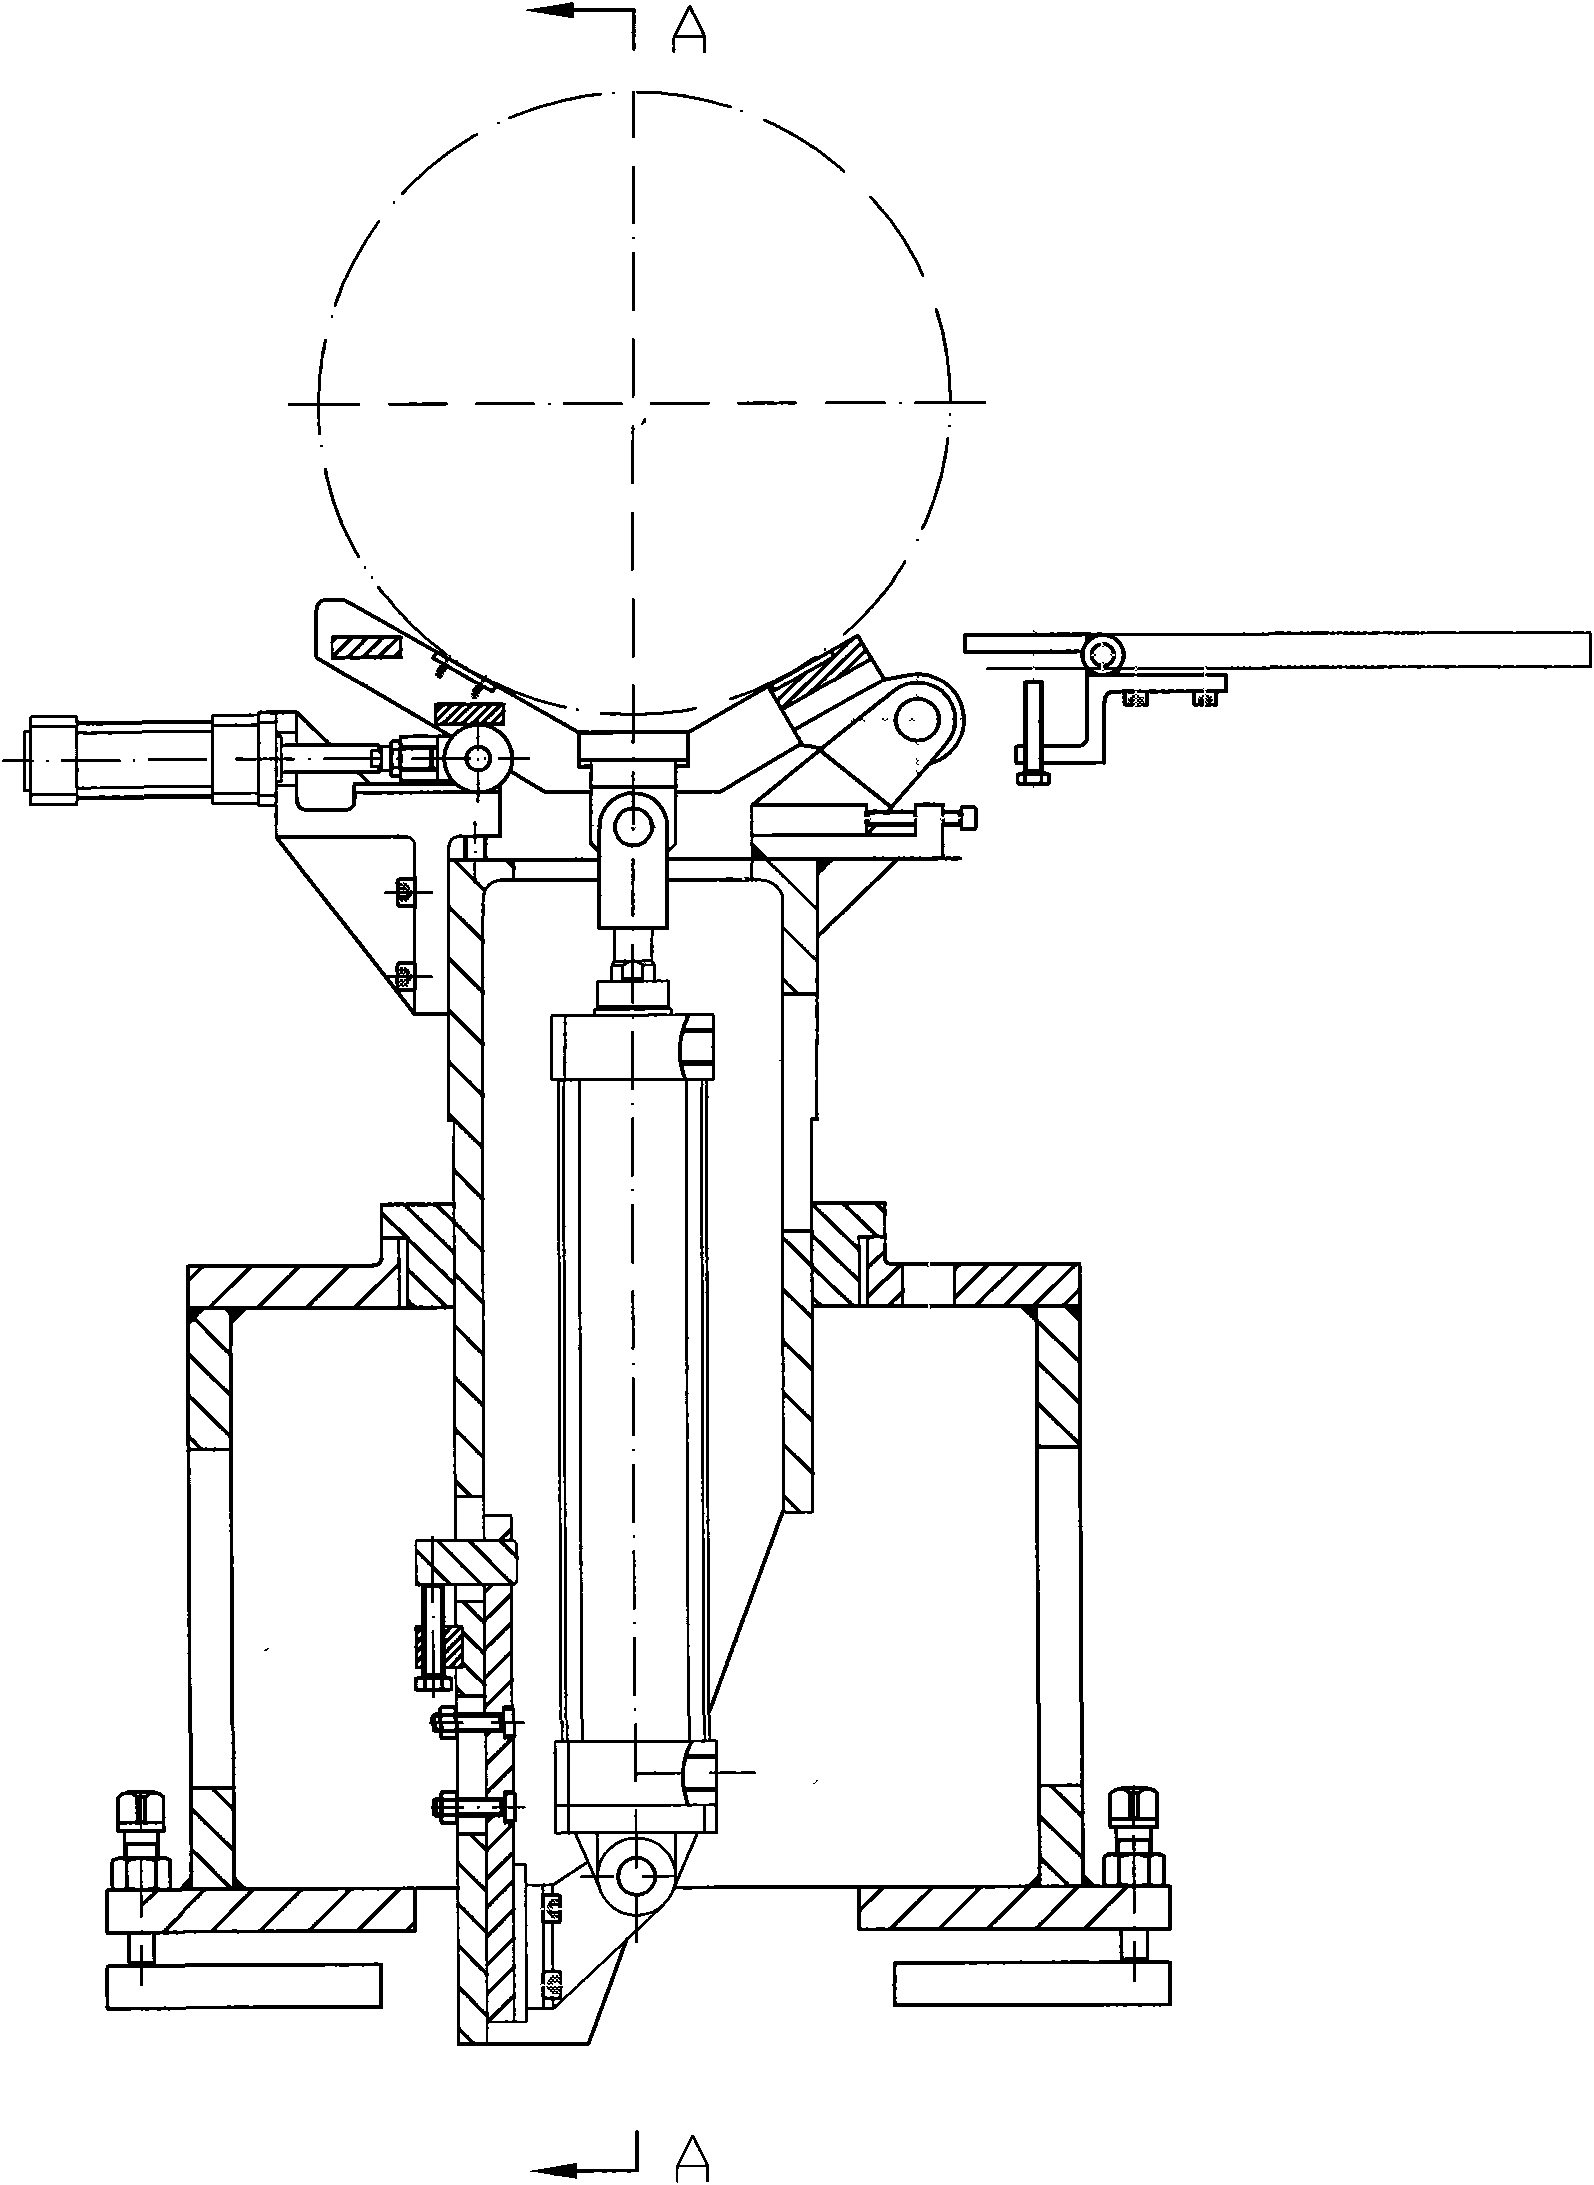 Automatic loading and unloading mechanism of cylindrical workpieces